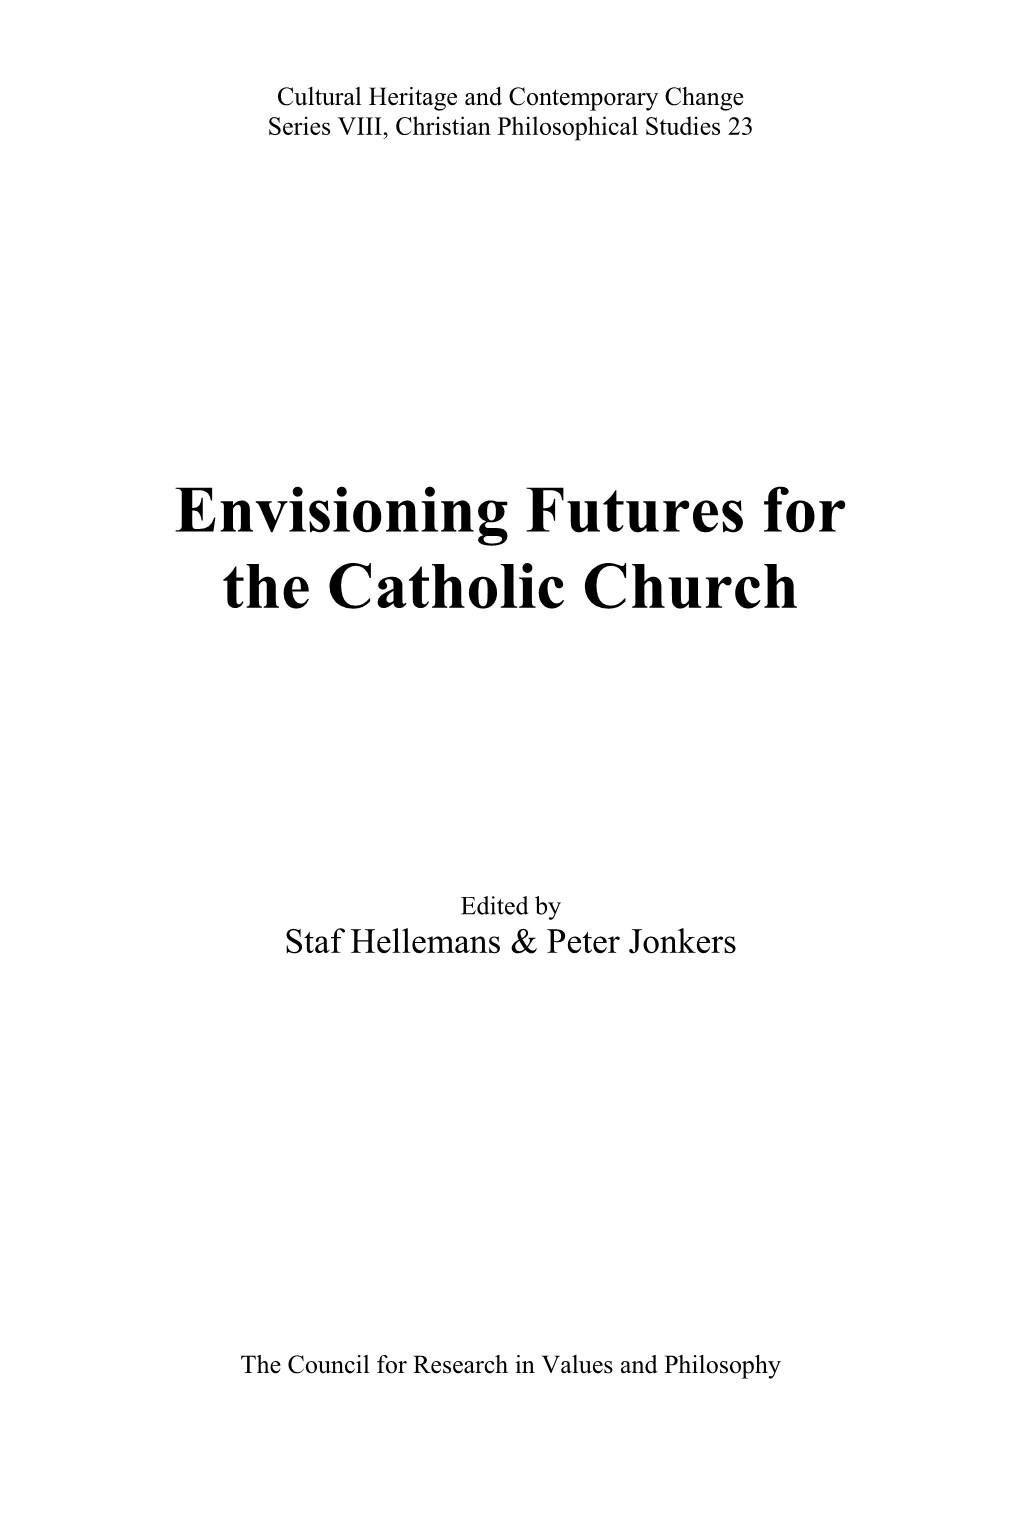 Envisioning Futures for the Catholic Church / Edited by Staf Hellemans and Peter Jonkers